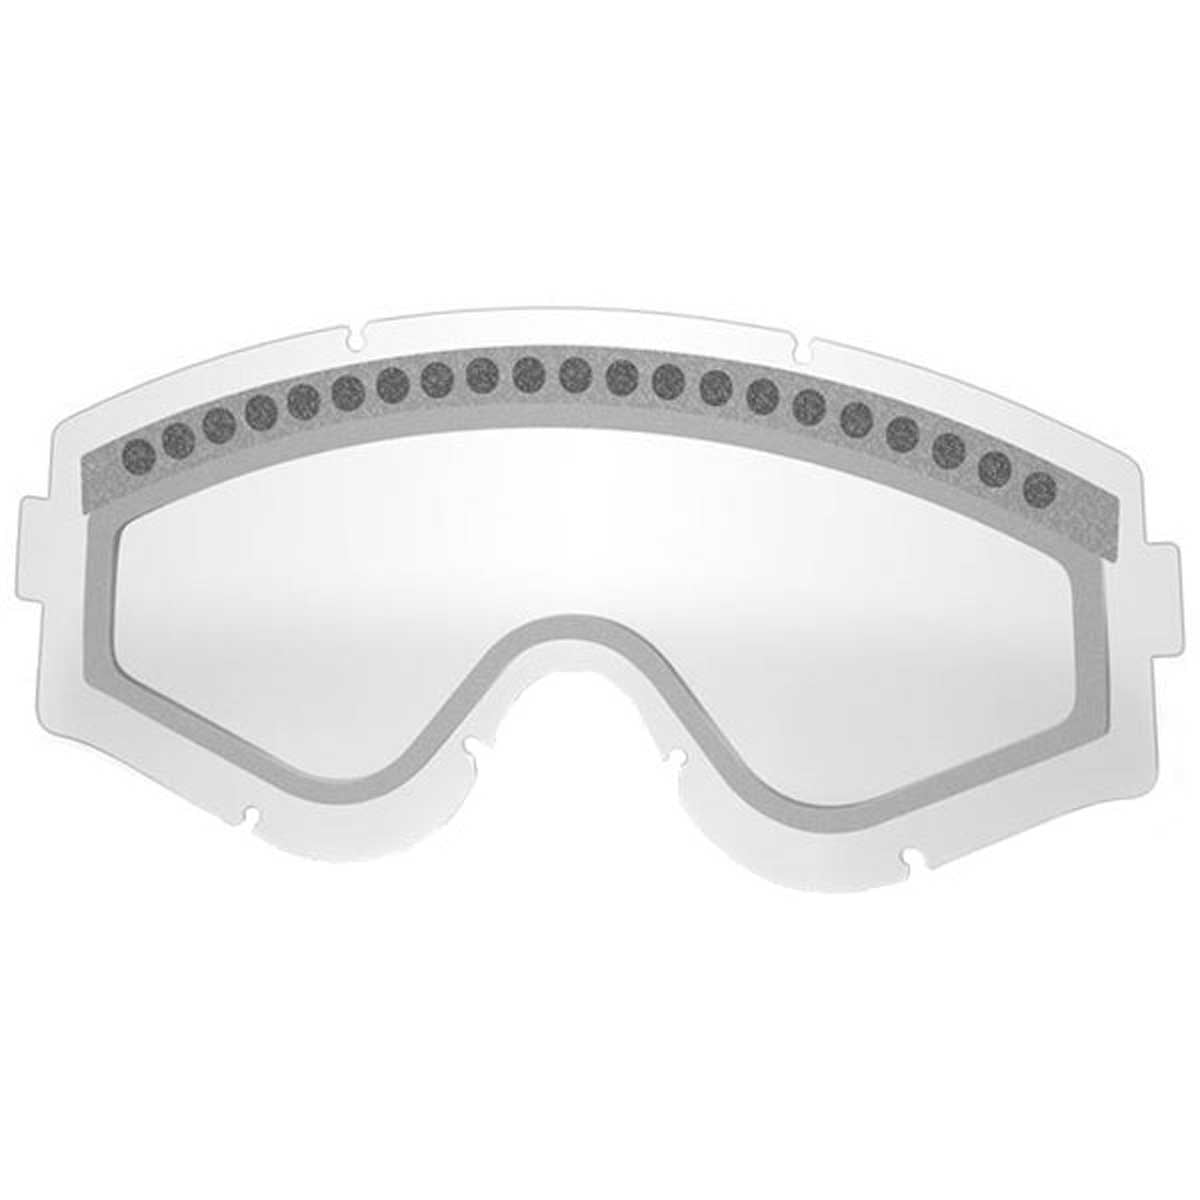 Oakley MX L Frame Replacement Lens Goggles Accessories-02-203